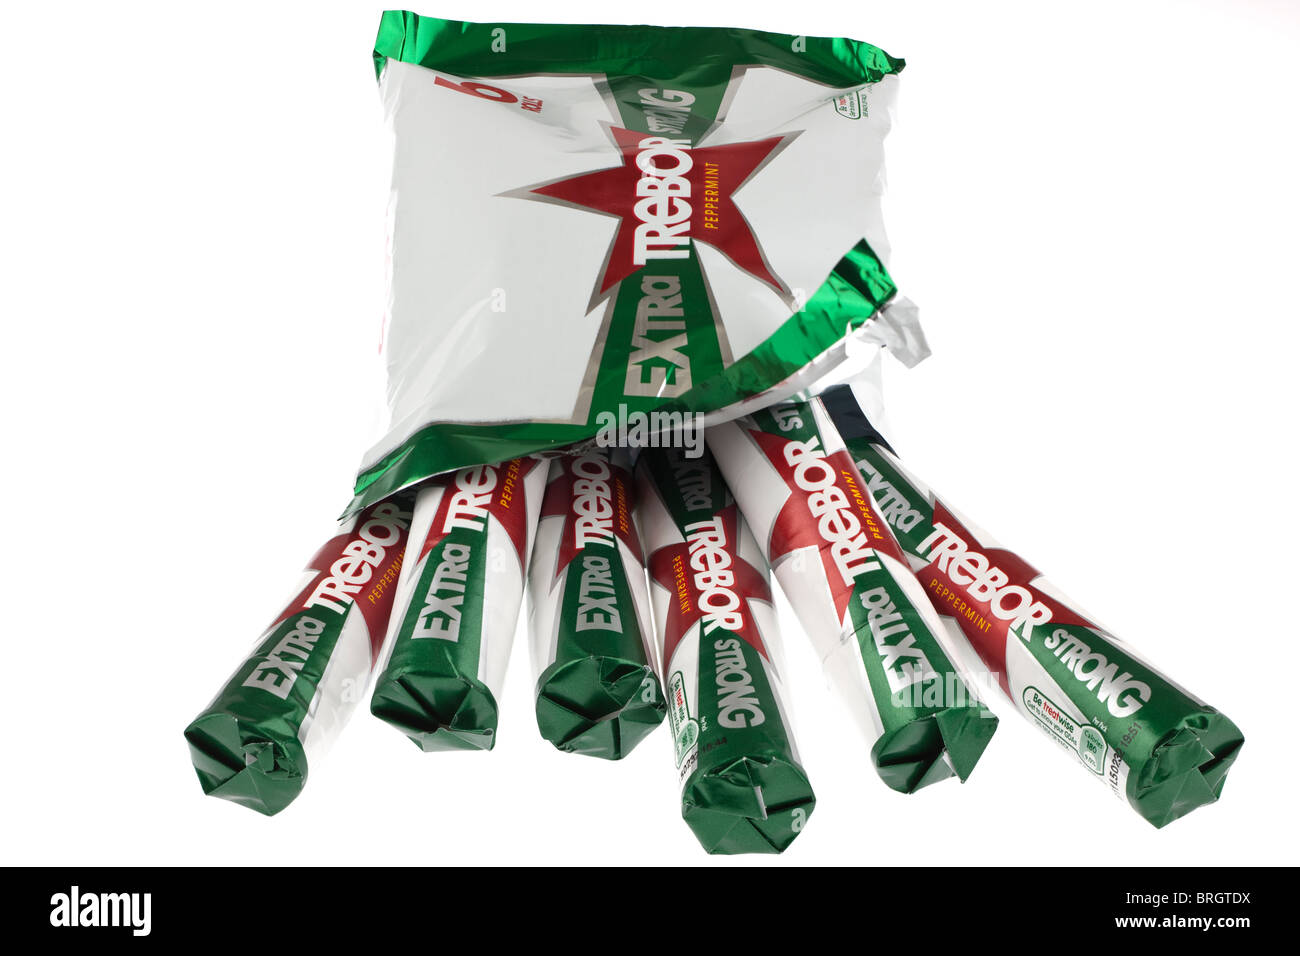 Packet containin 6 rolls of extra strong Trebor peppermint mint sweets Stock Photo